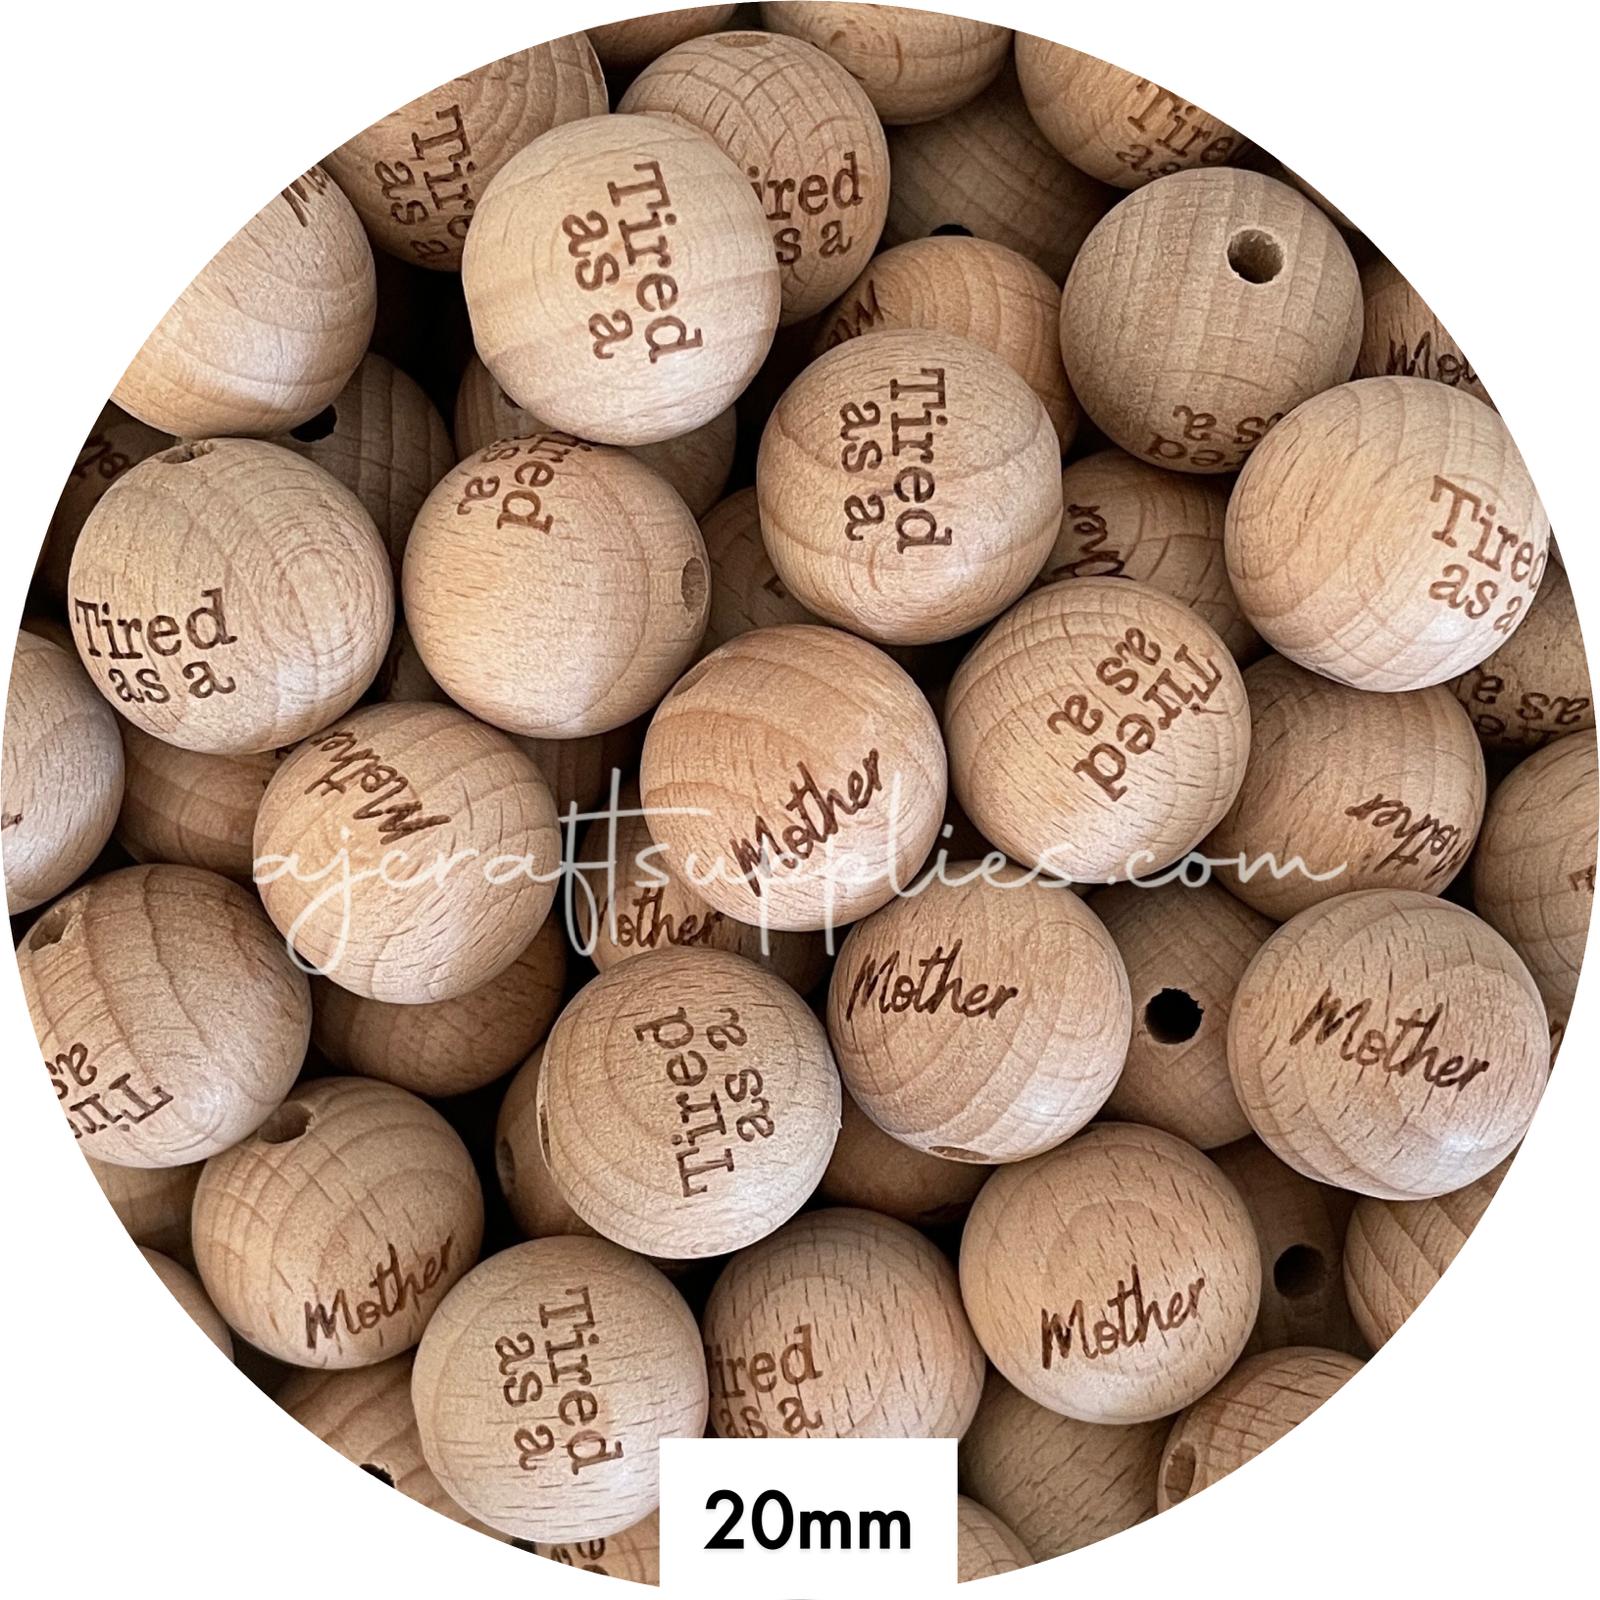 Beech Wood Engraved Beads (Tired as a Mother) - 20mm Round - 5 beads *CLEARANCE*